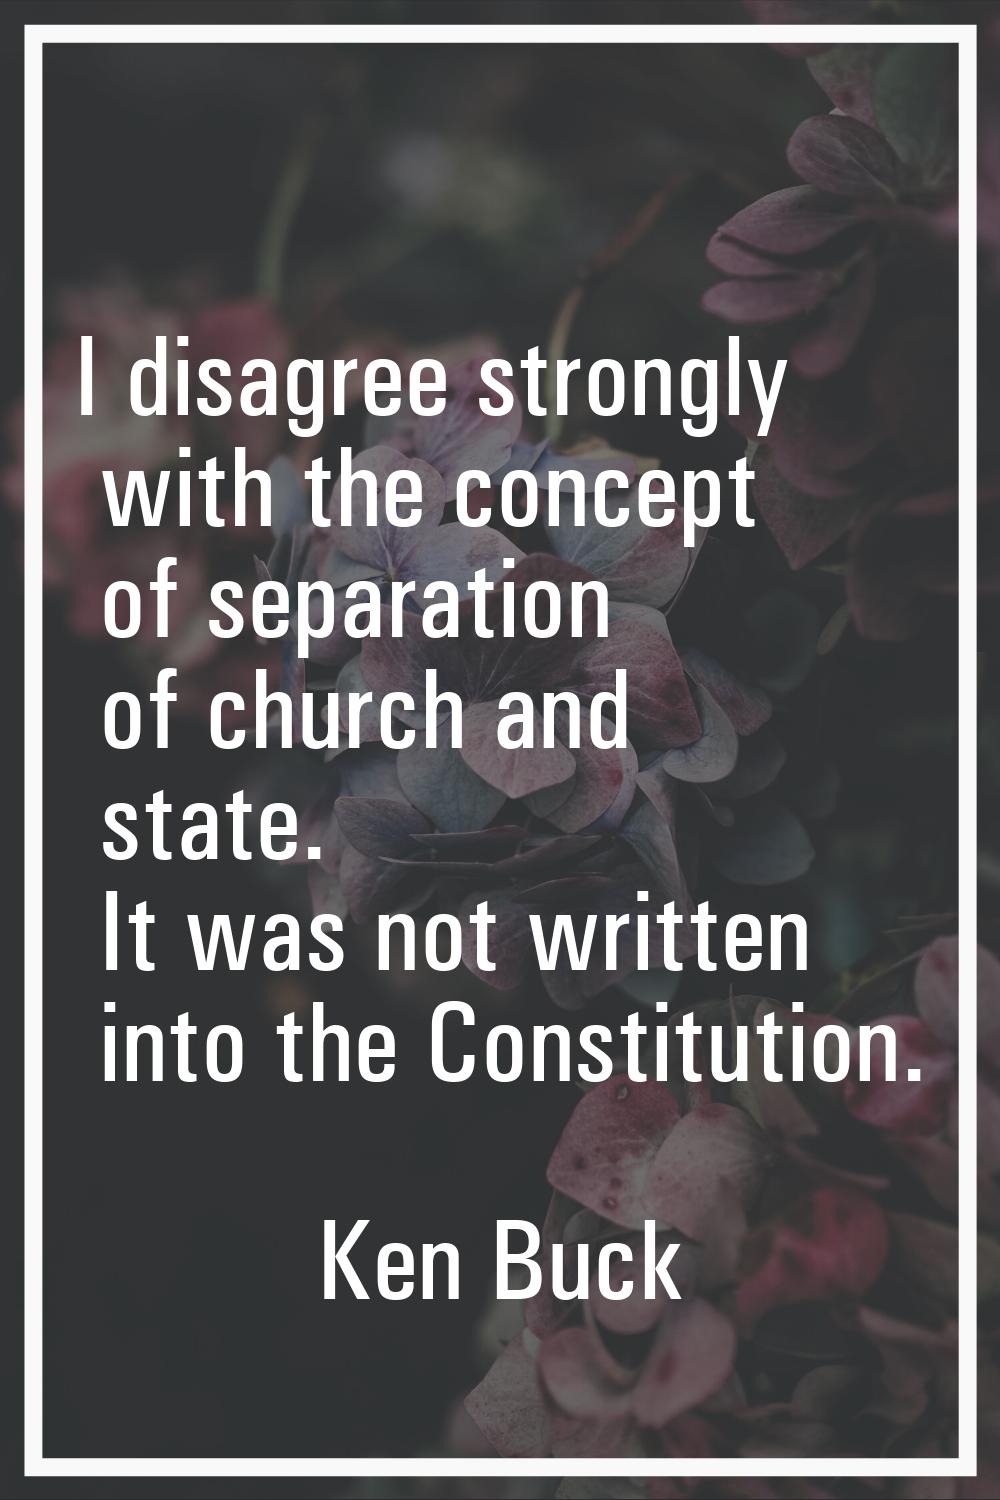 I disagree strongly with the concept of separation of church and state. It was not written into the